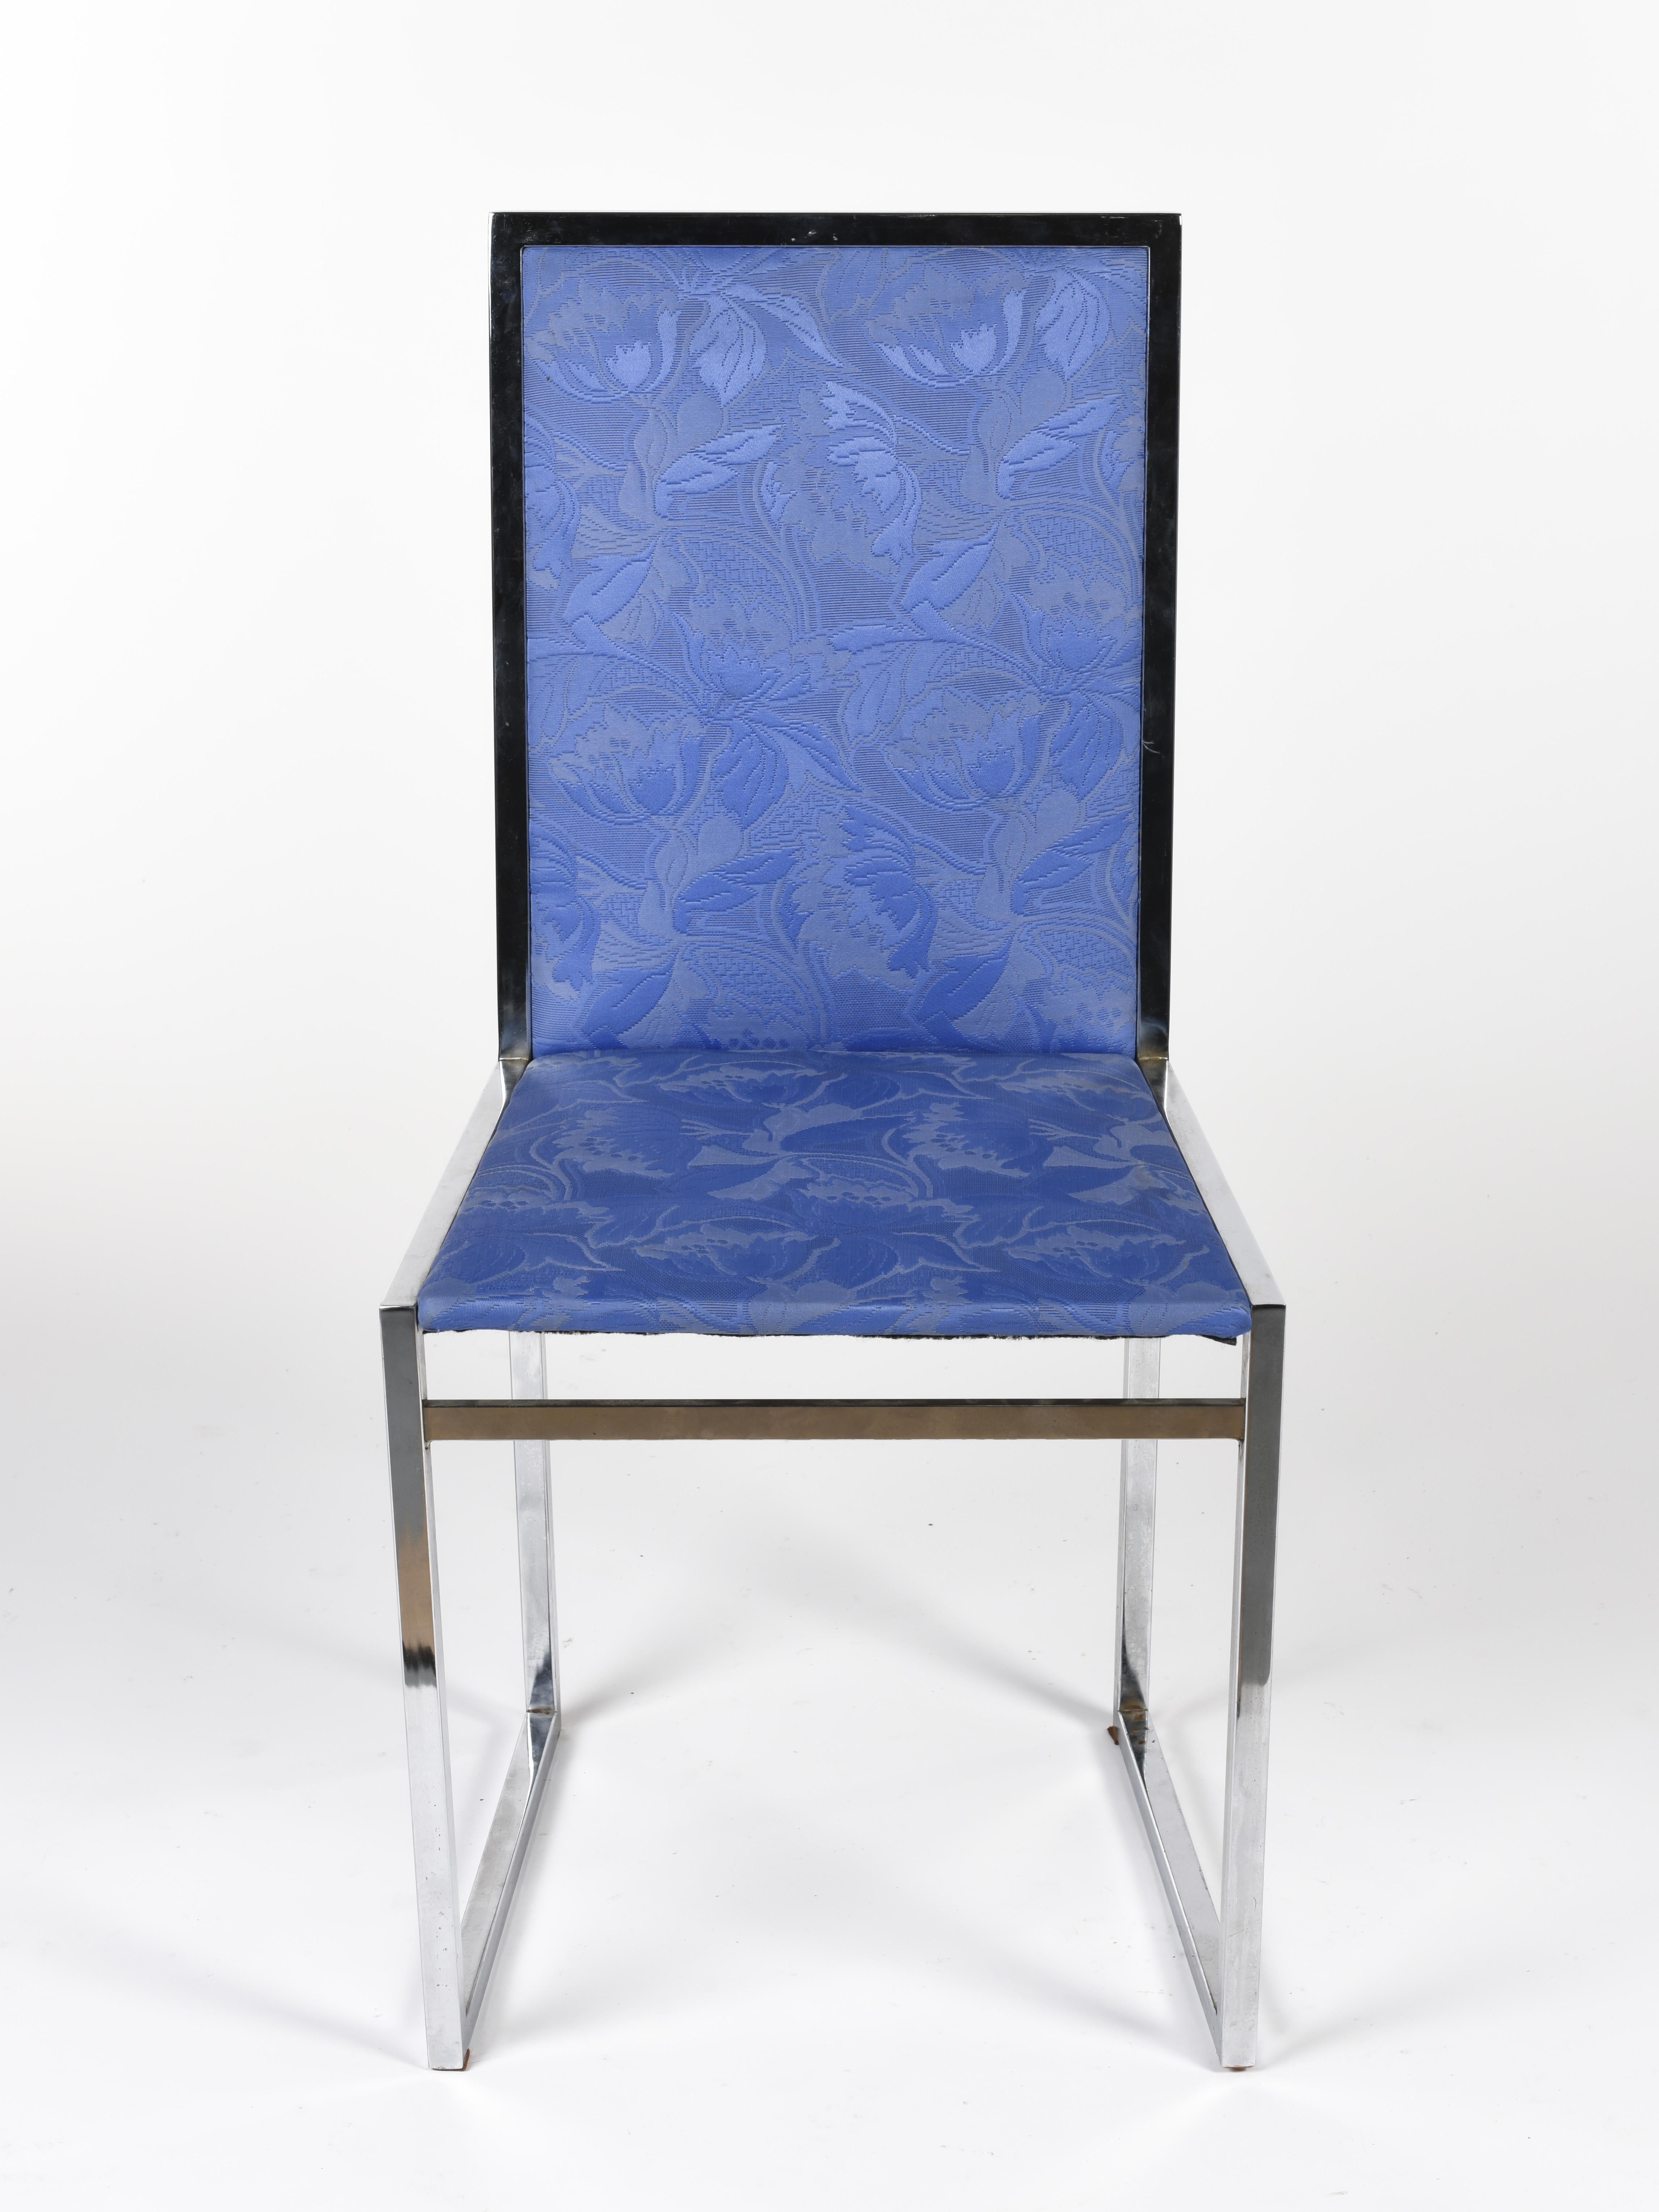 Set of 6 high back dining chairs by La Metal Arredo Paderno Milano.
All the structure is in metal chromed and upholstered in a chic Italian blue suede.
Each chair is like a piece of art. Reupholstered in a cobalt blue suede. Manufactured by La